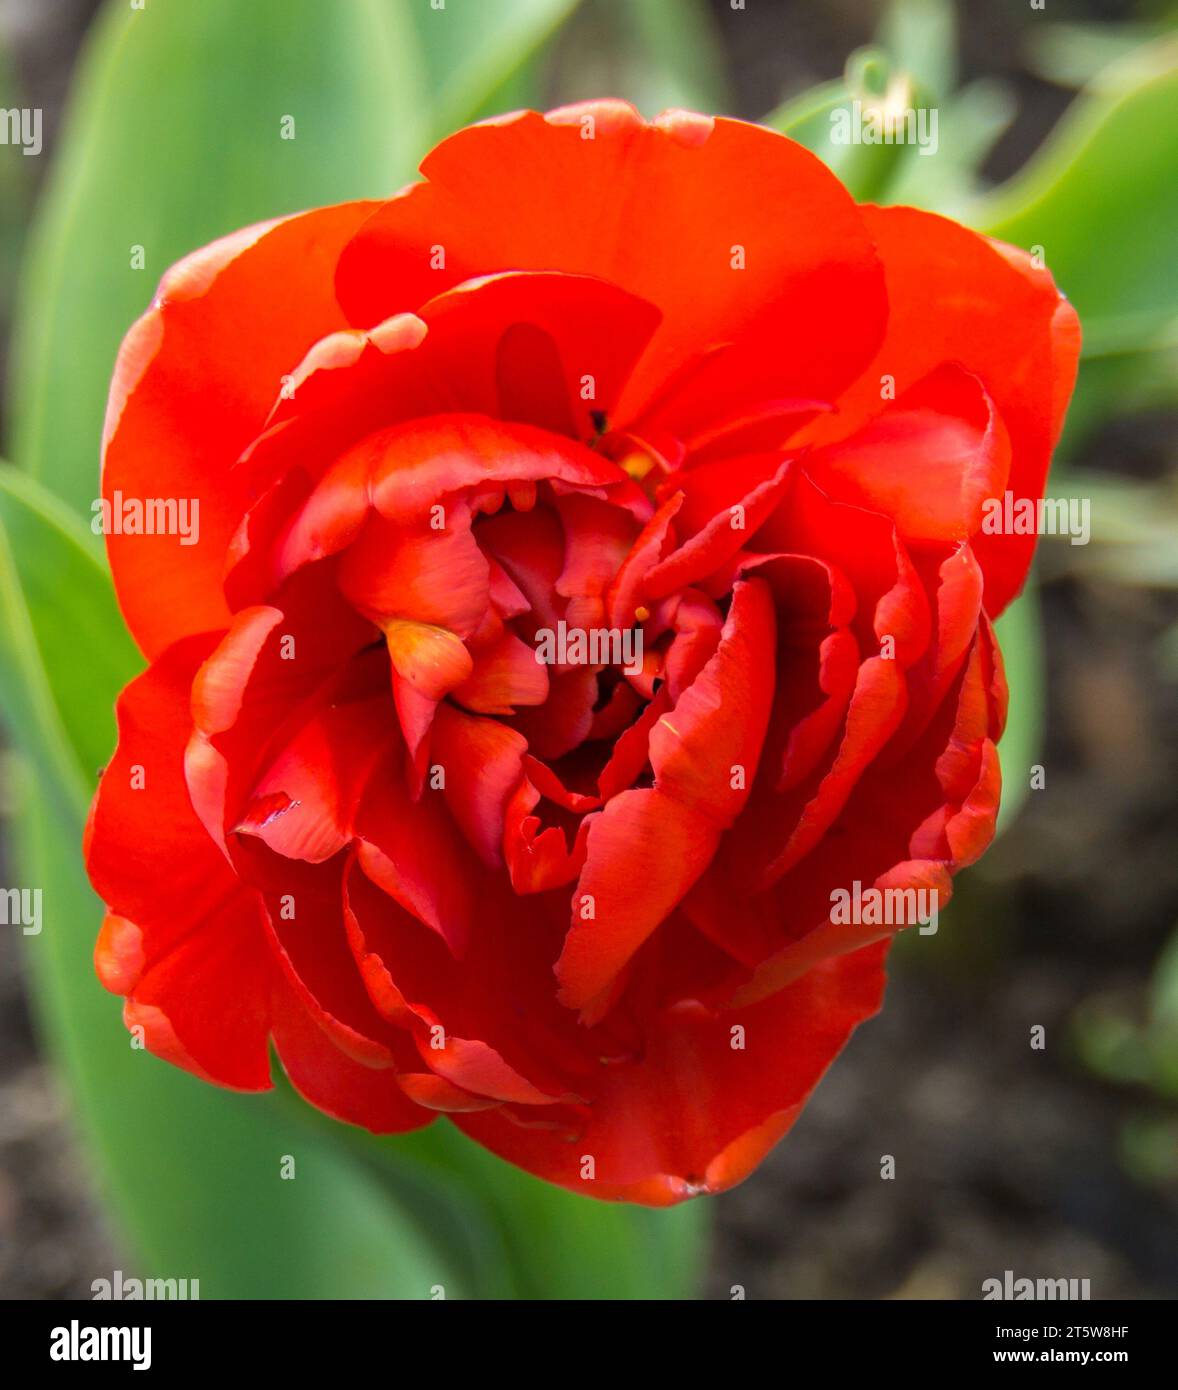 Wonderful tulip flowers blooming in the spring garden. Stock Photo